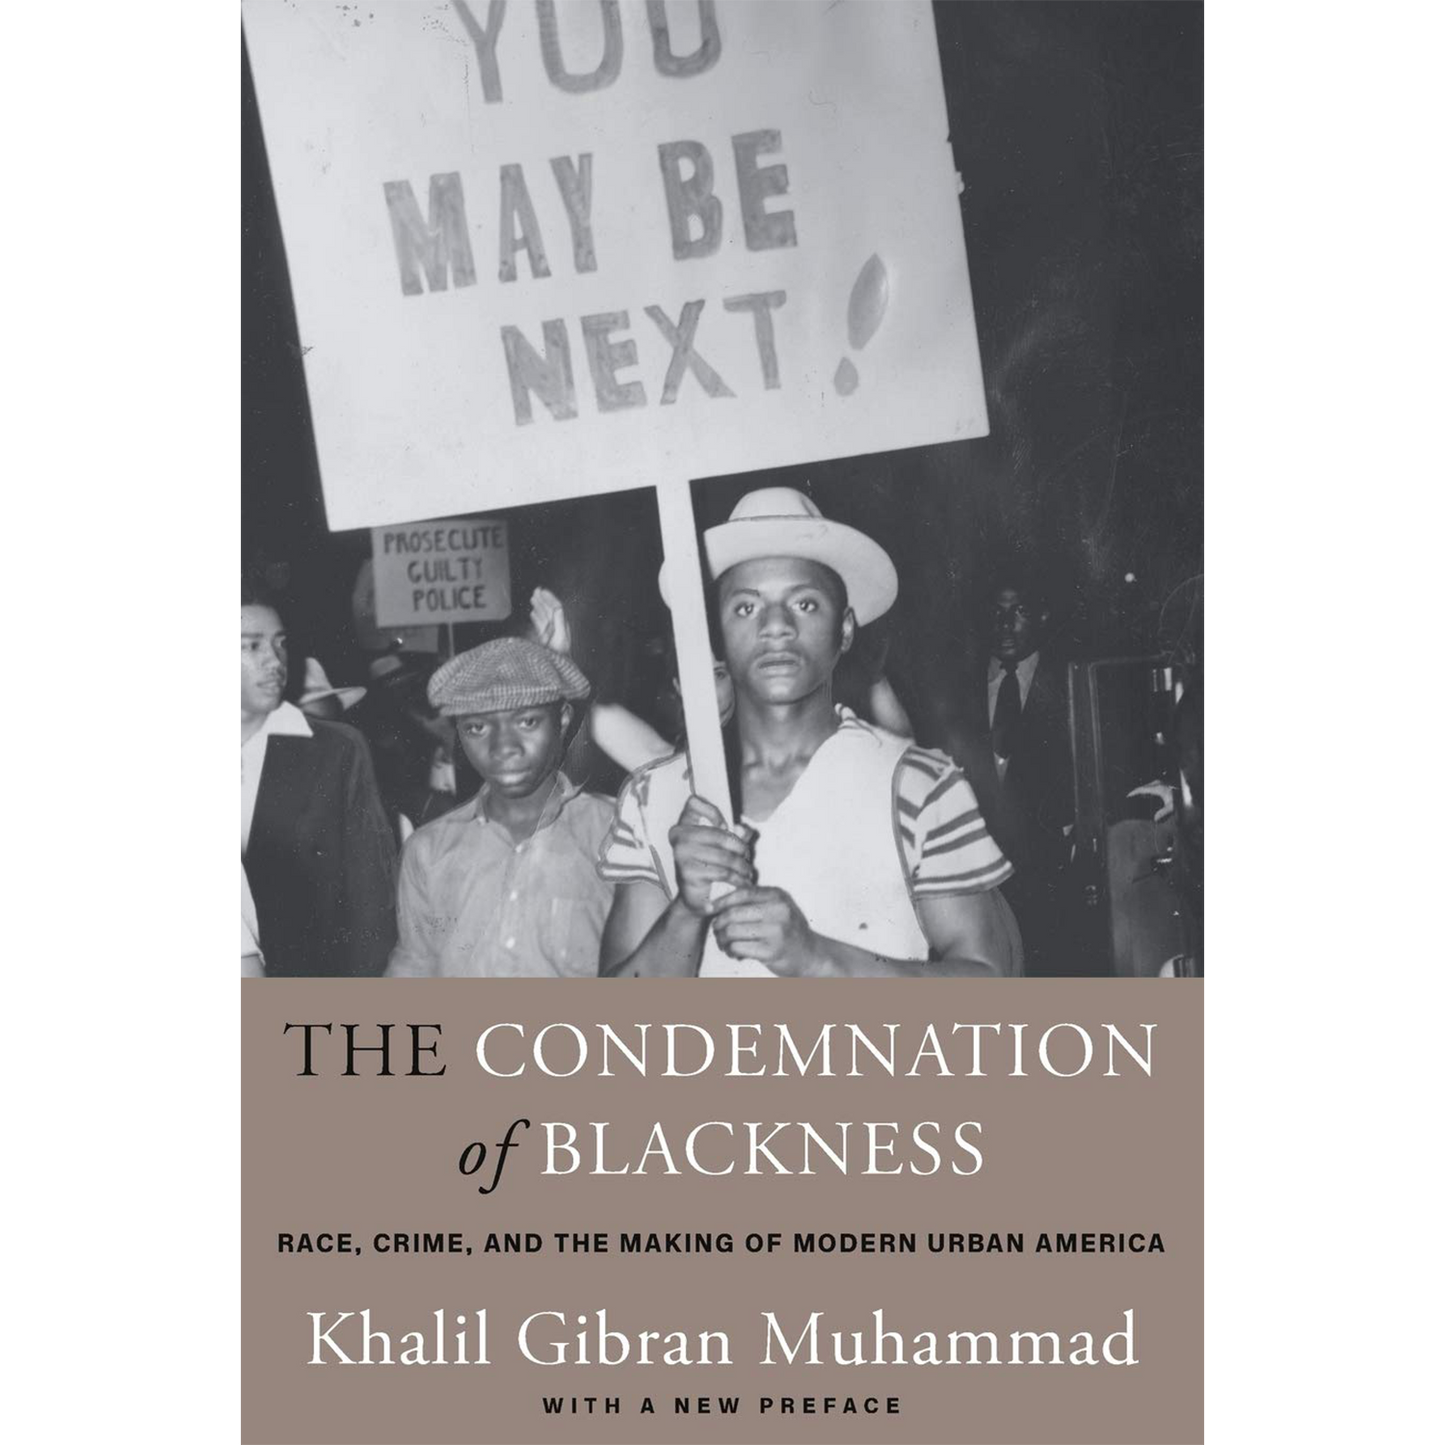 The Condemnation of Blackness: Race, Crime, and the Making of Modern Urban America, With a New Preface